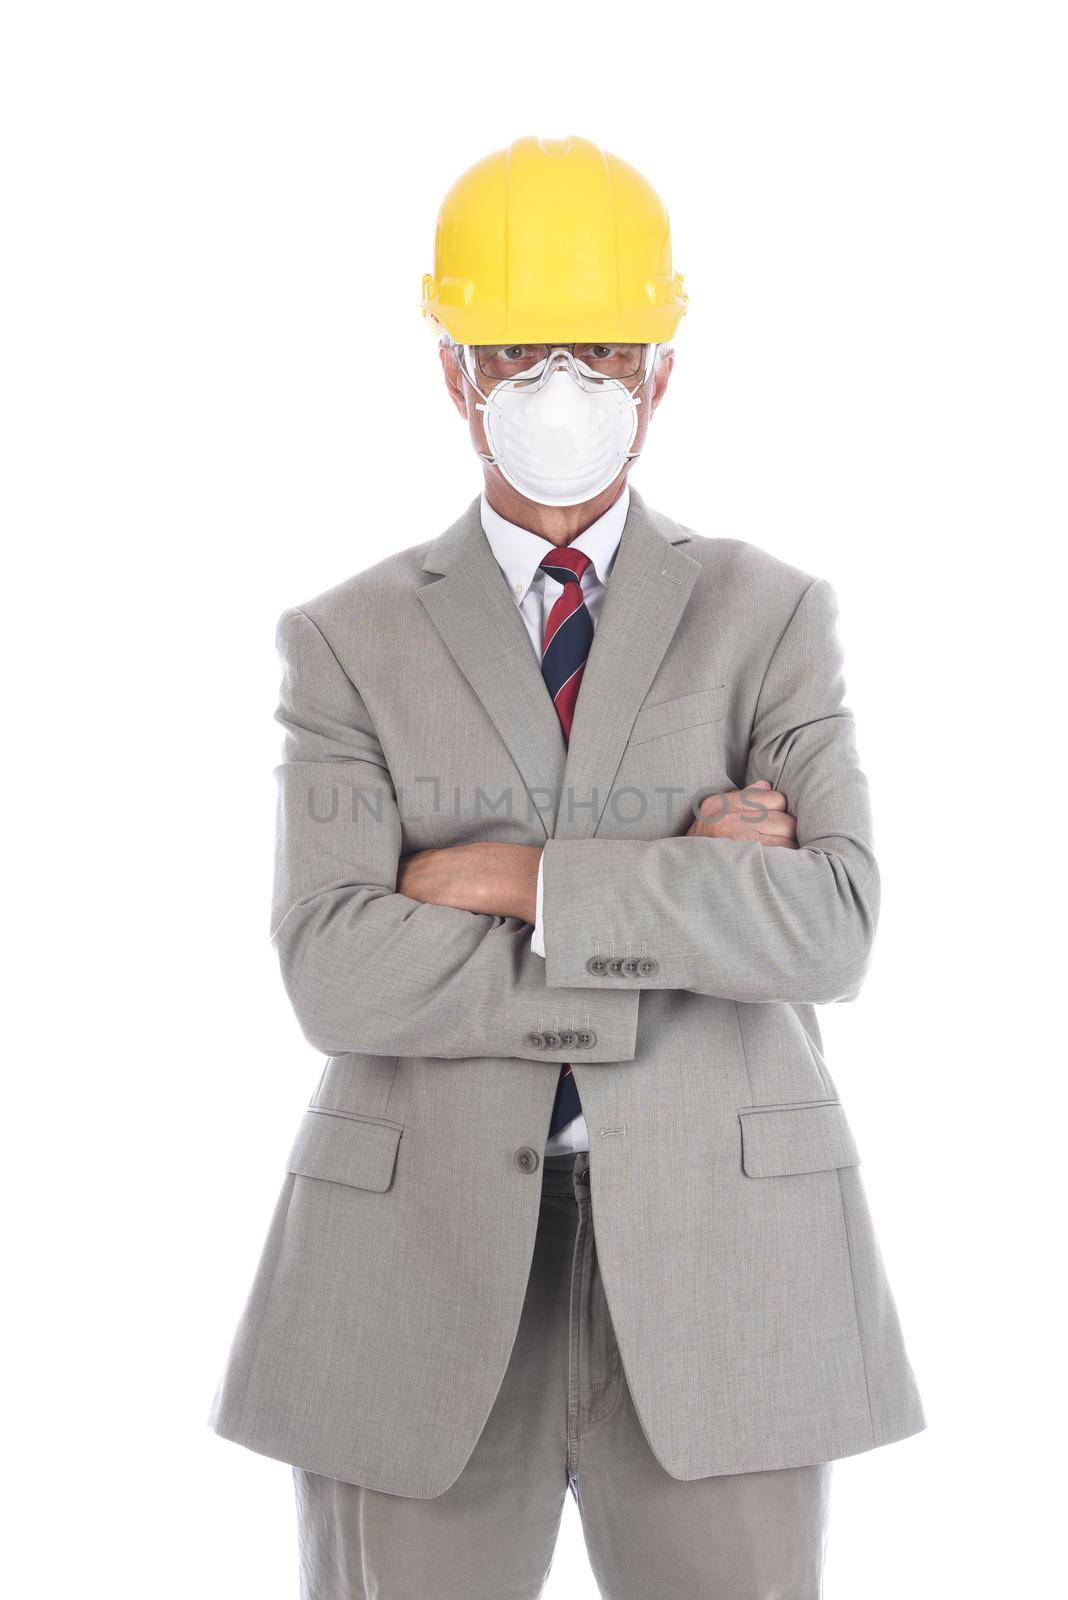 A businessman architect in a light tan suit wearing a hard had and protective face mask.  by sCukrov